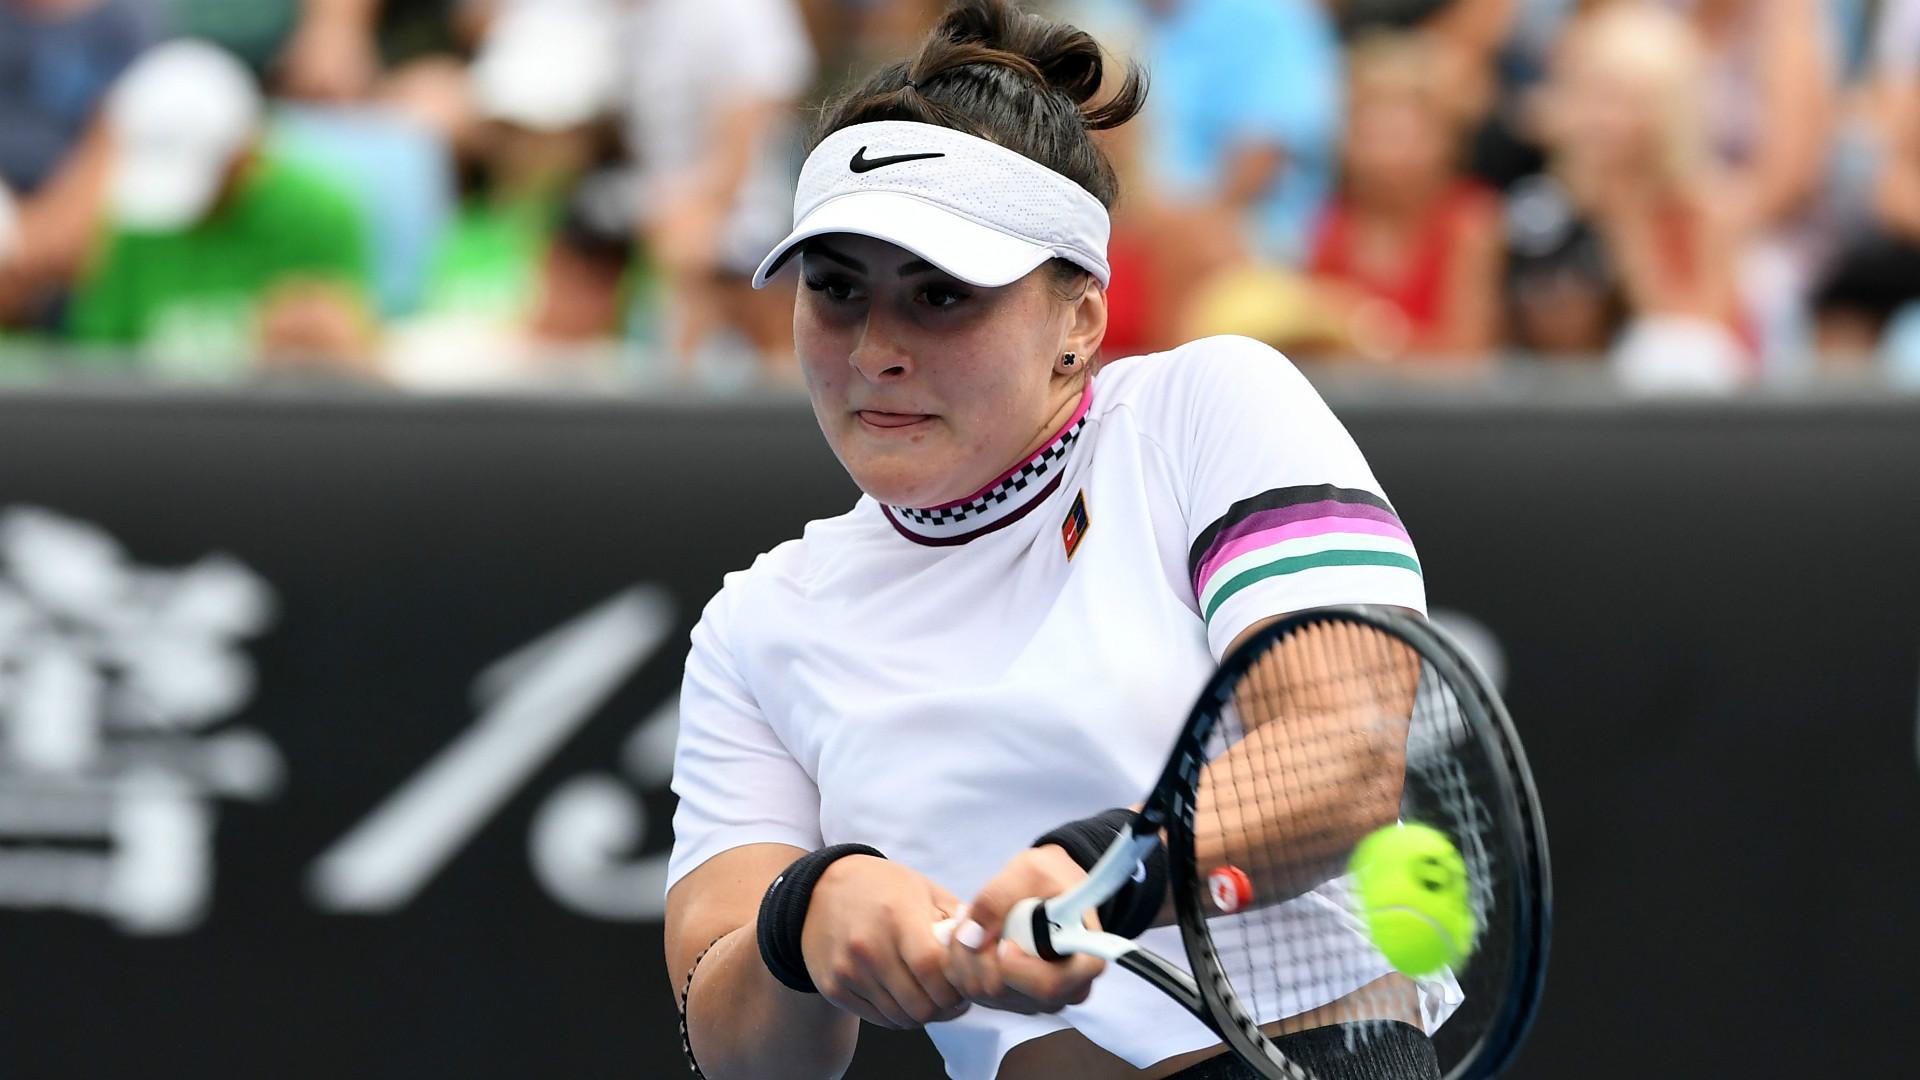 Oracle Challenger Series: Bianca Andreescu wins first career WTA